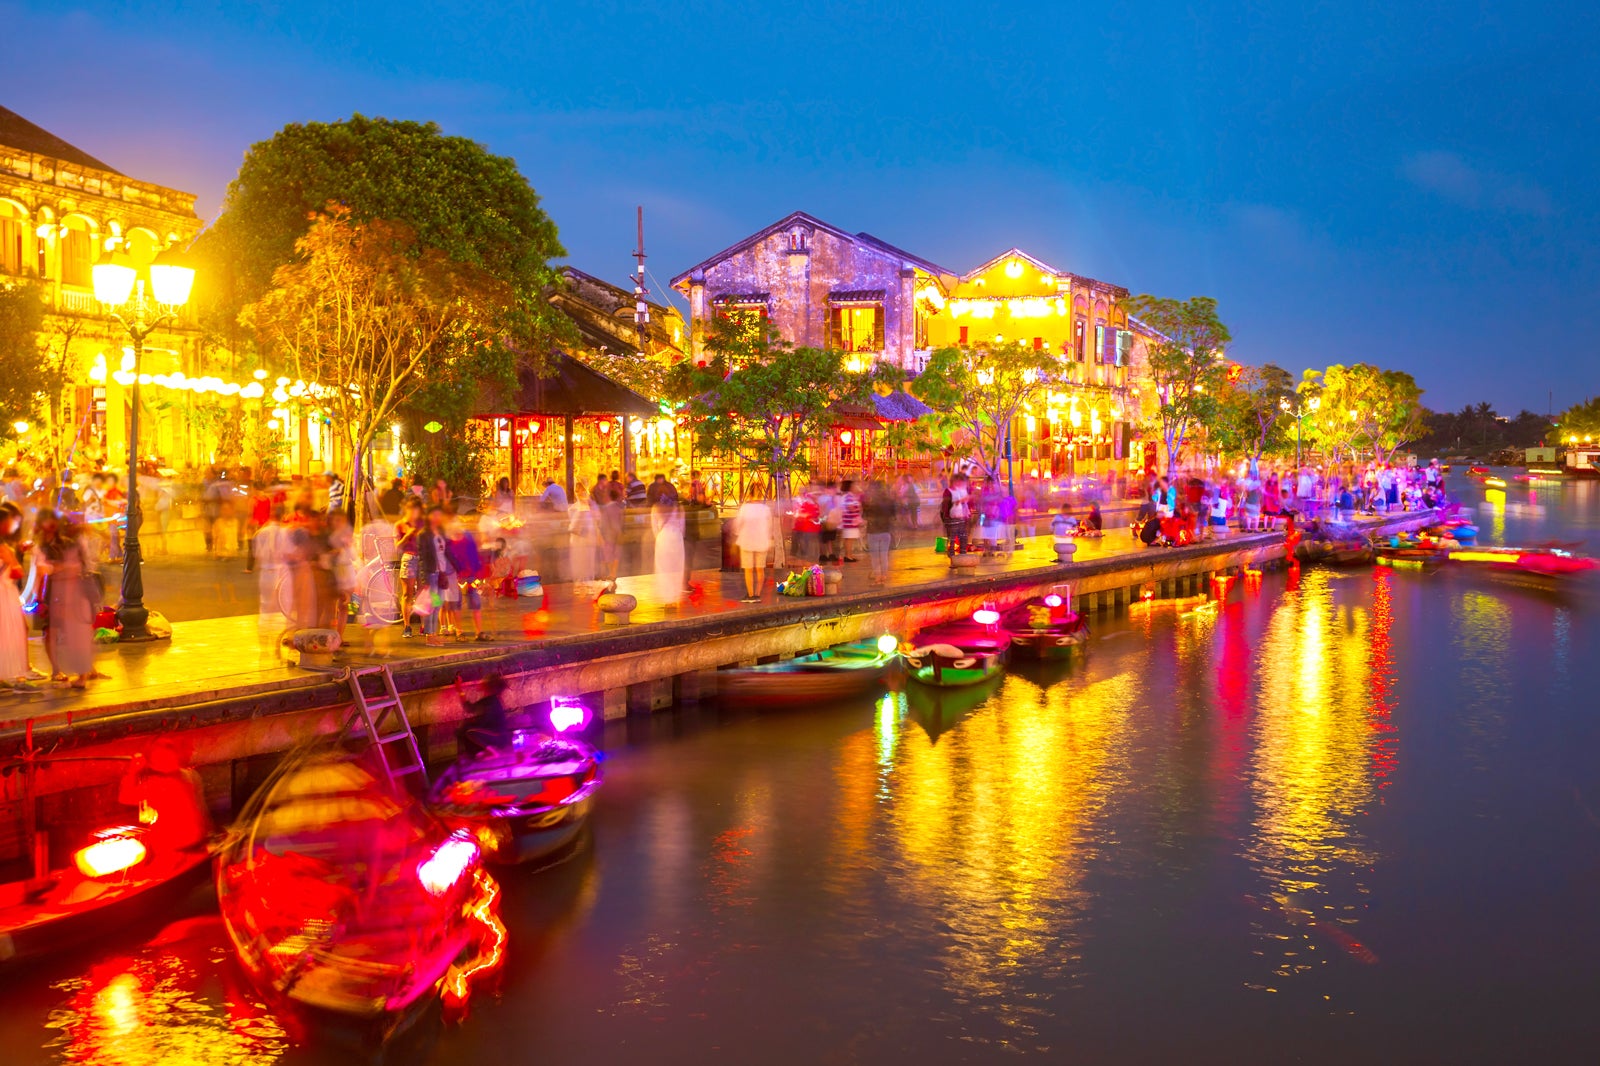 Best Things to Do in Hoi An: Hoi An Ancient Town